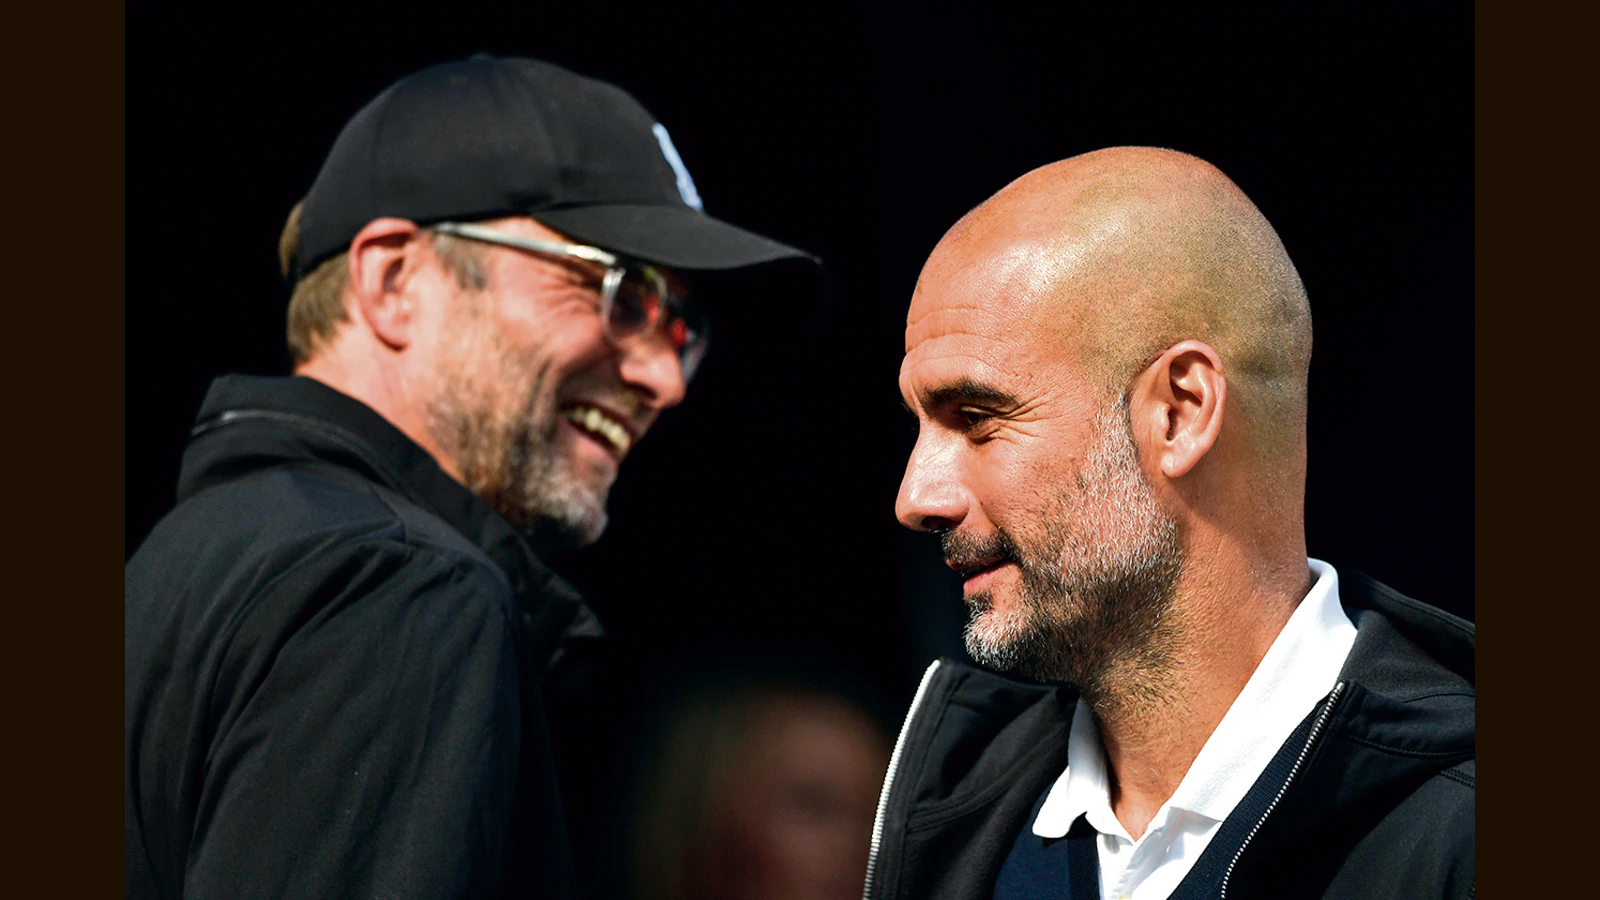 One for the ages: Klopp, Guardiola and a battle with no beef